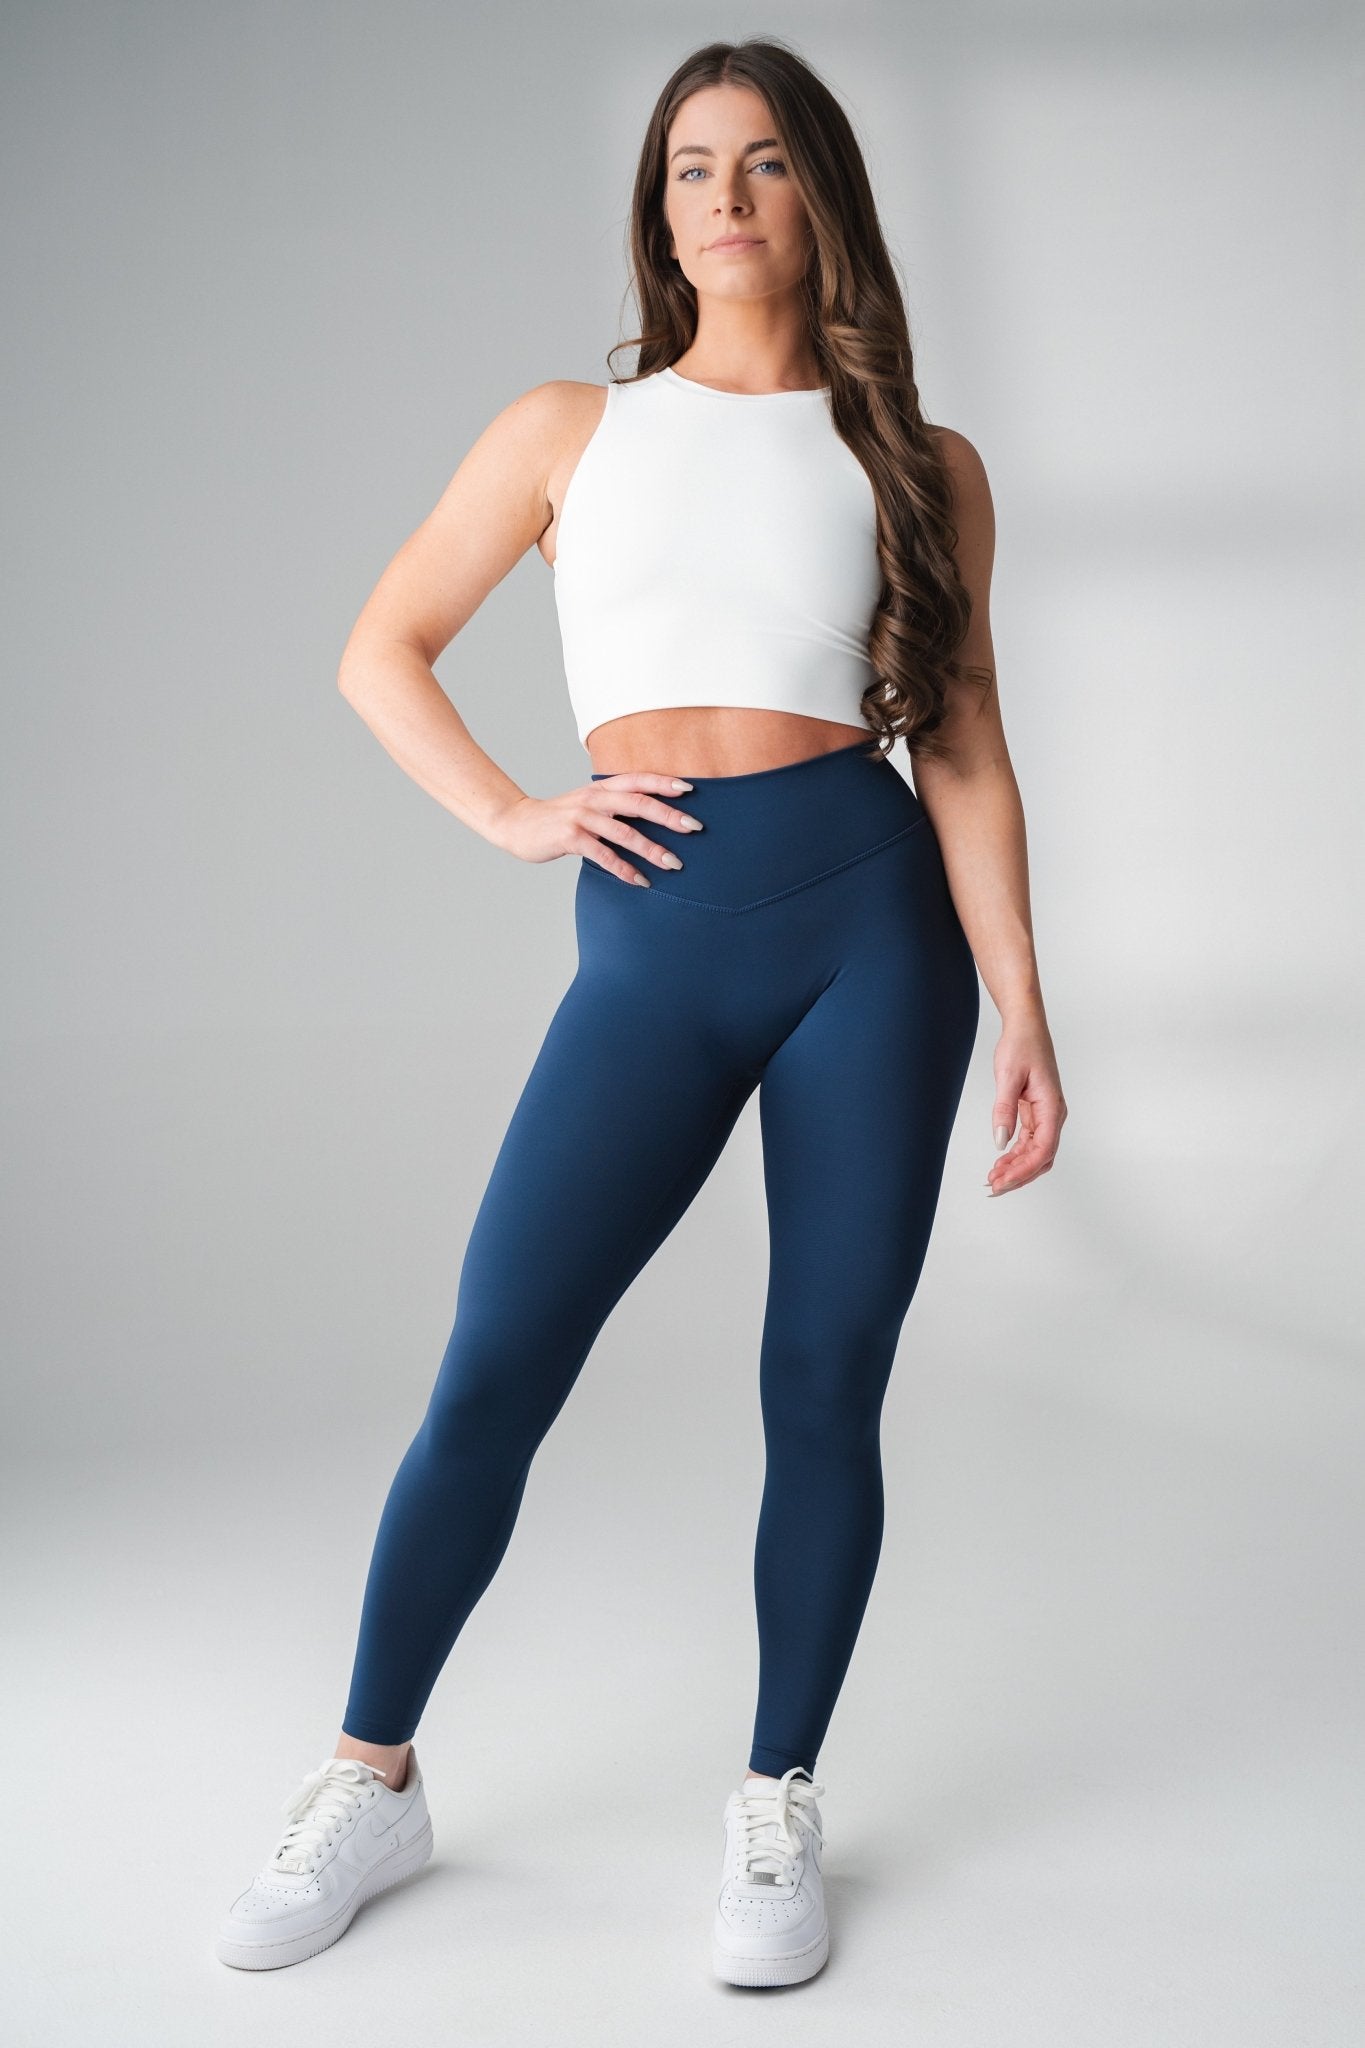 Gap - Comfortable Activewear On Sale to Freshen Up Your Activewear